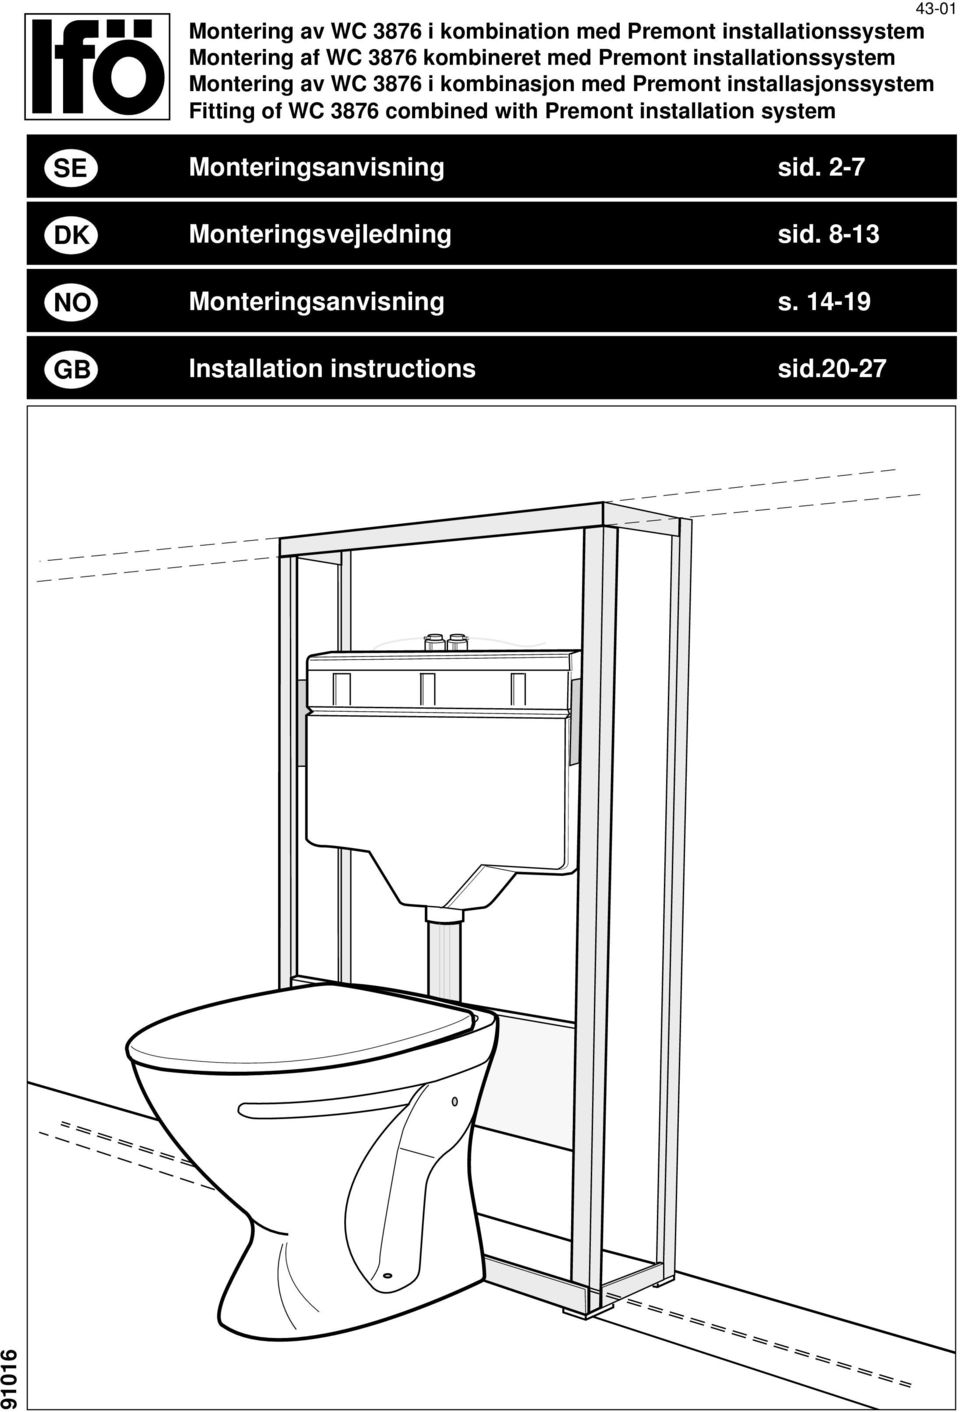 installasjonssystem Fitting of WC 3876 combined with Premont installation system SE